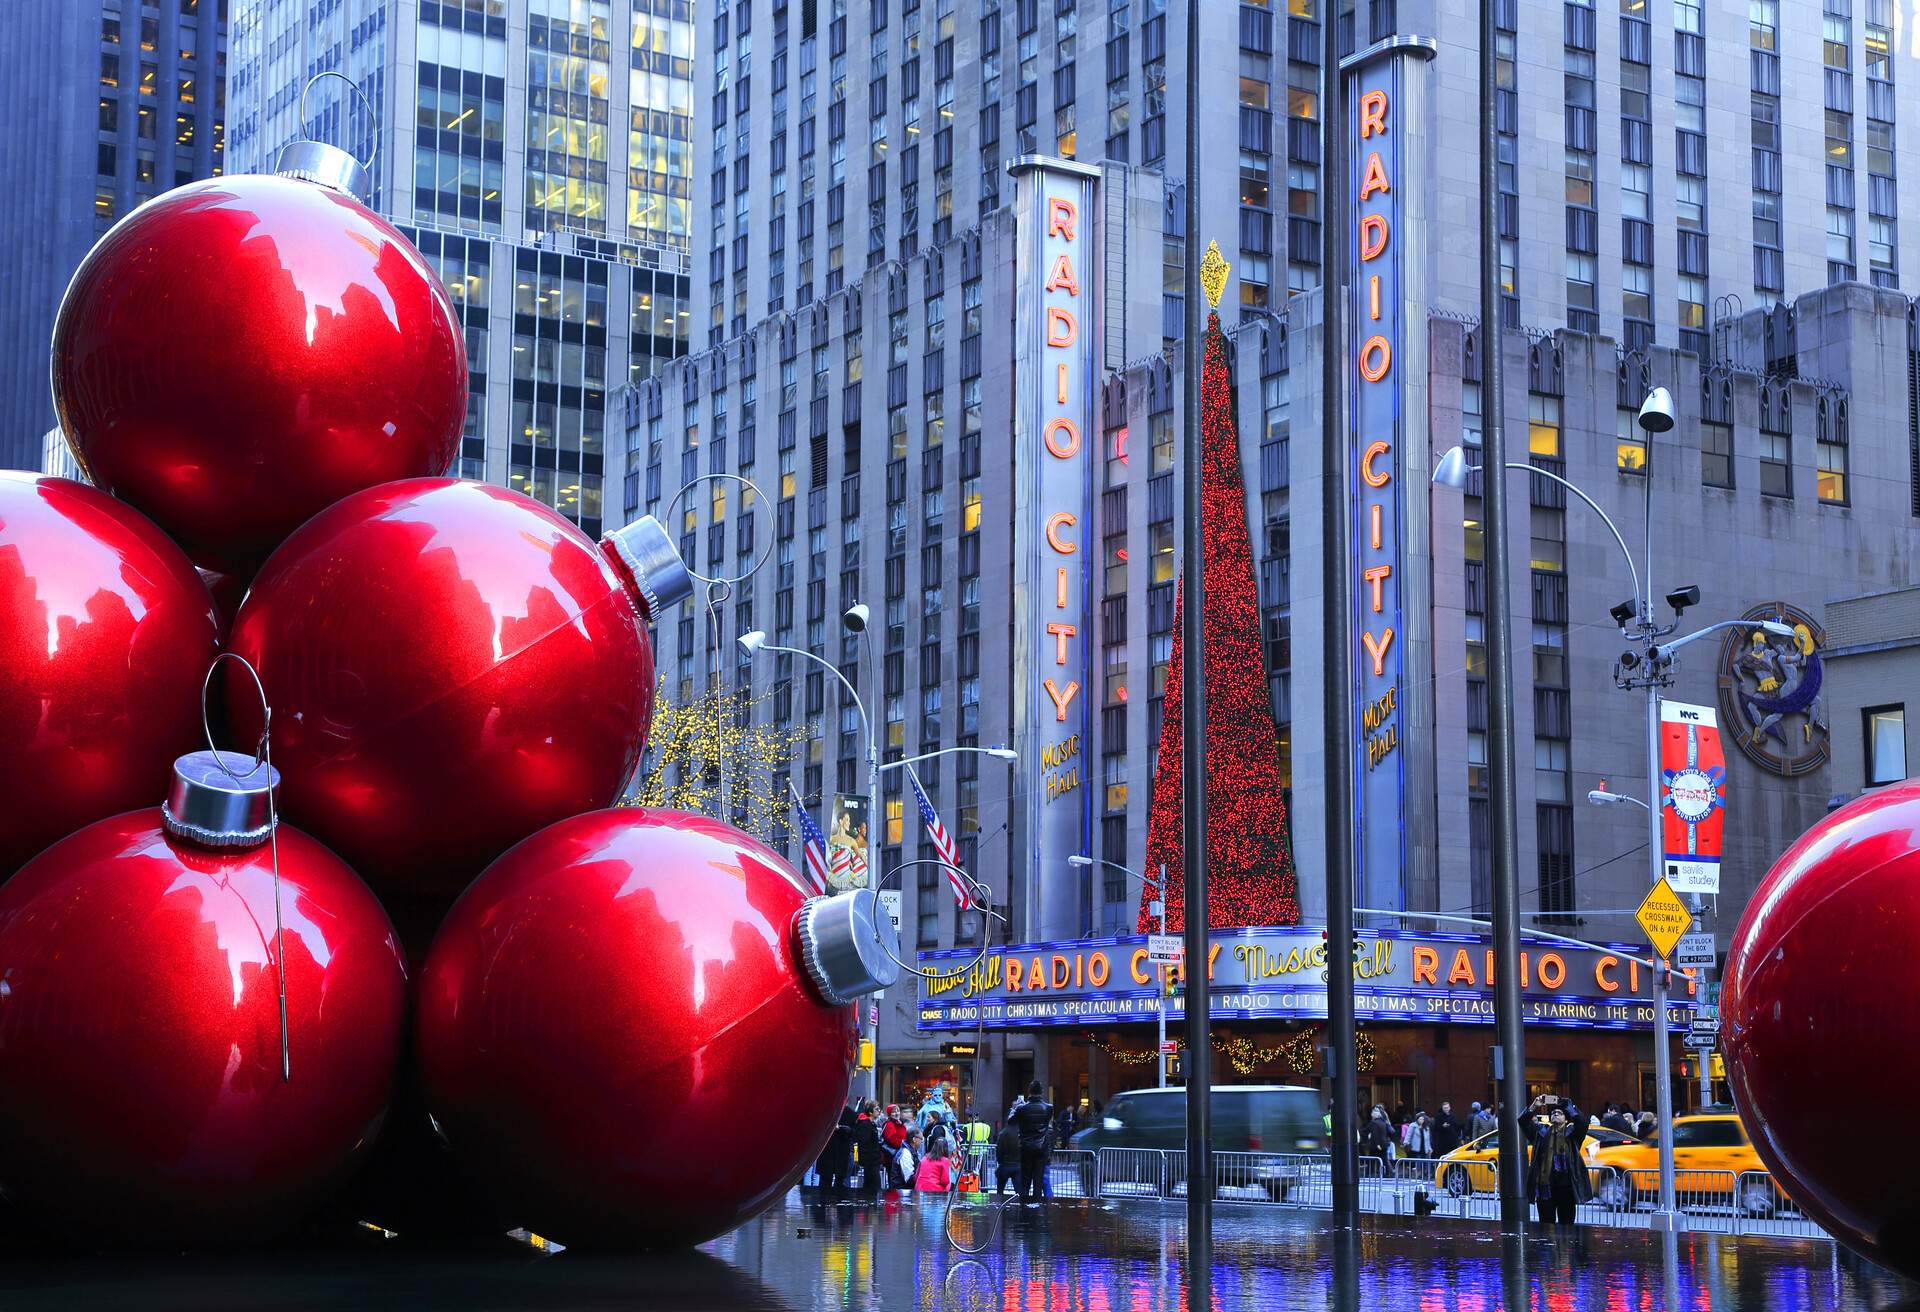 A huge display of red ornamental Christmas balls on the pavement that offers a view of the city's buildings.